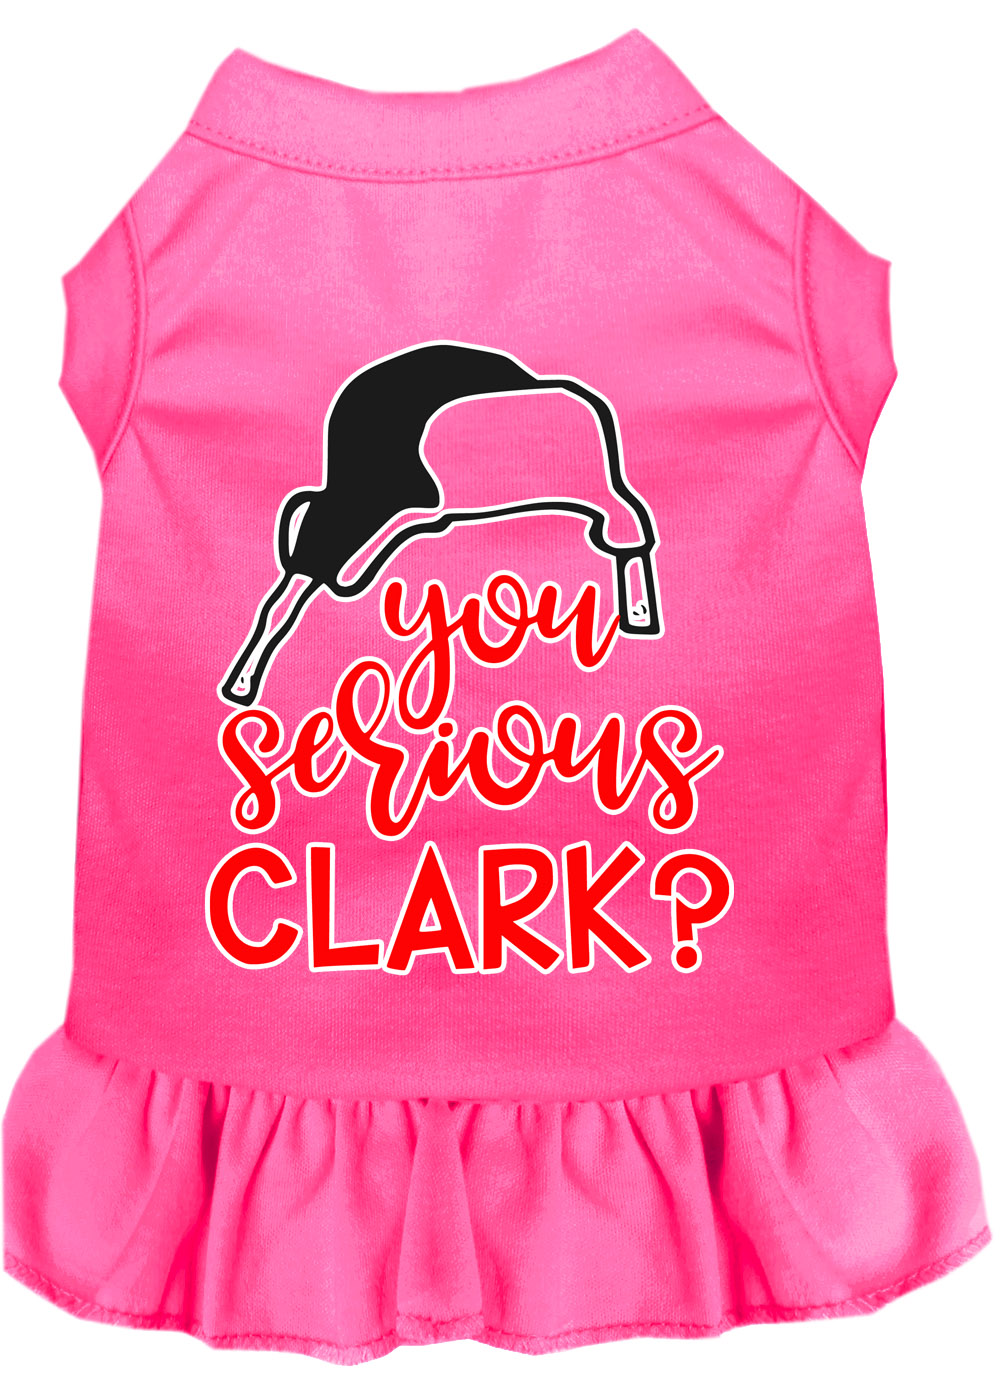 You Serious Clark? Screen Print Dog Dress Bright Pink Med